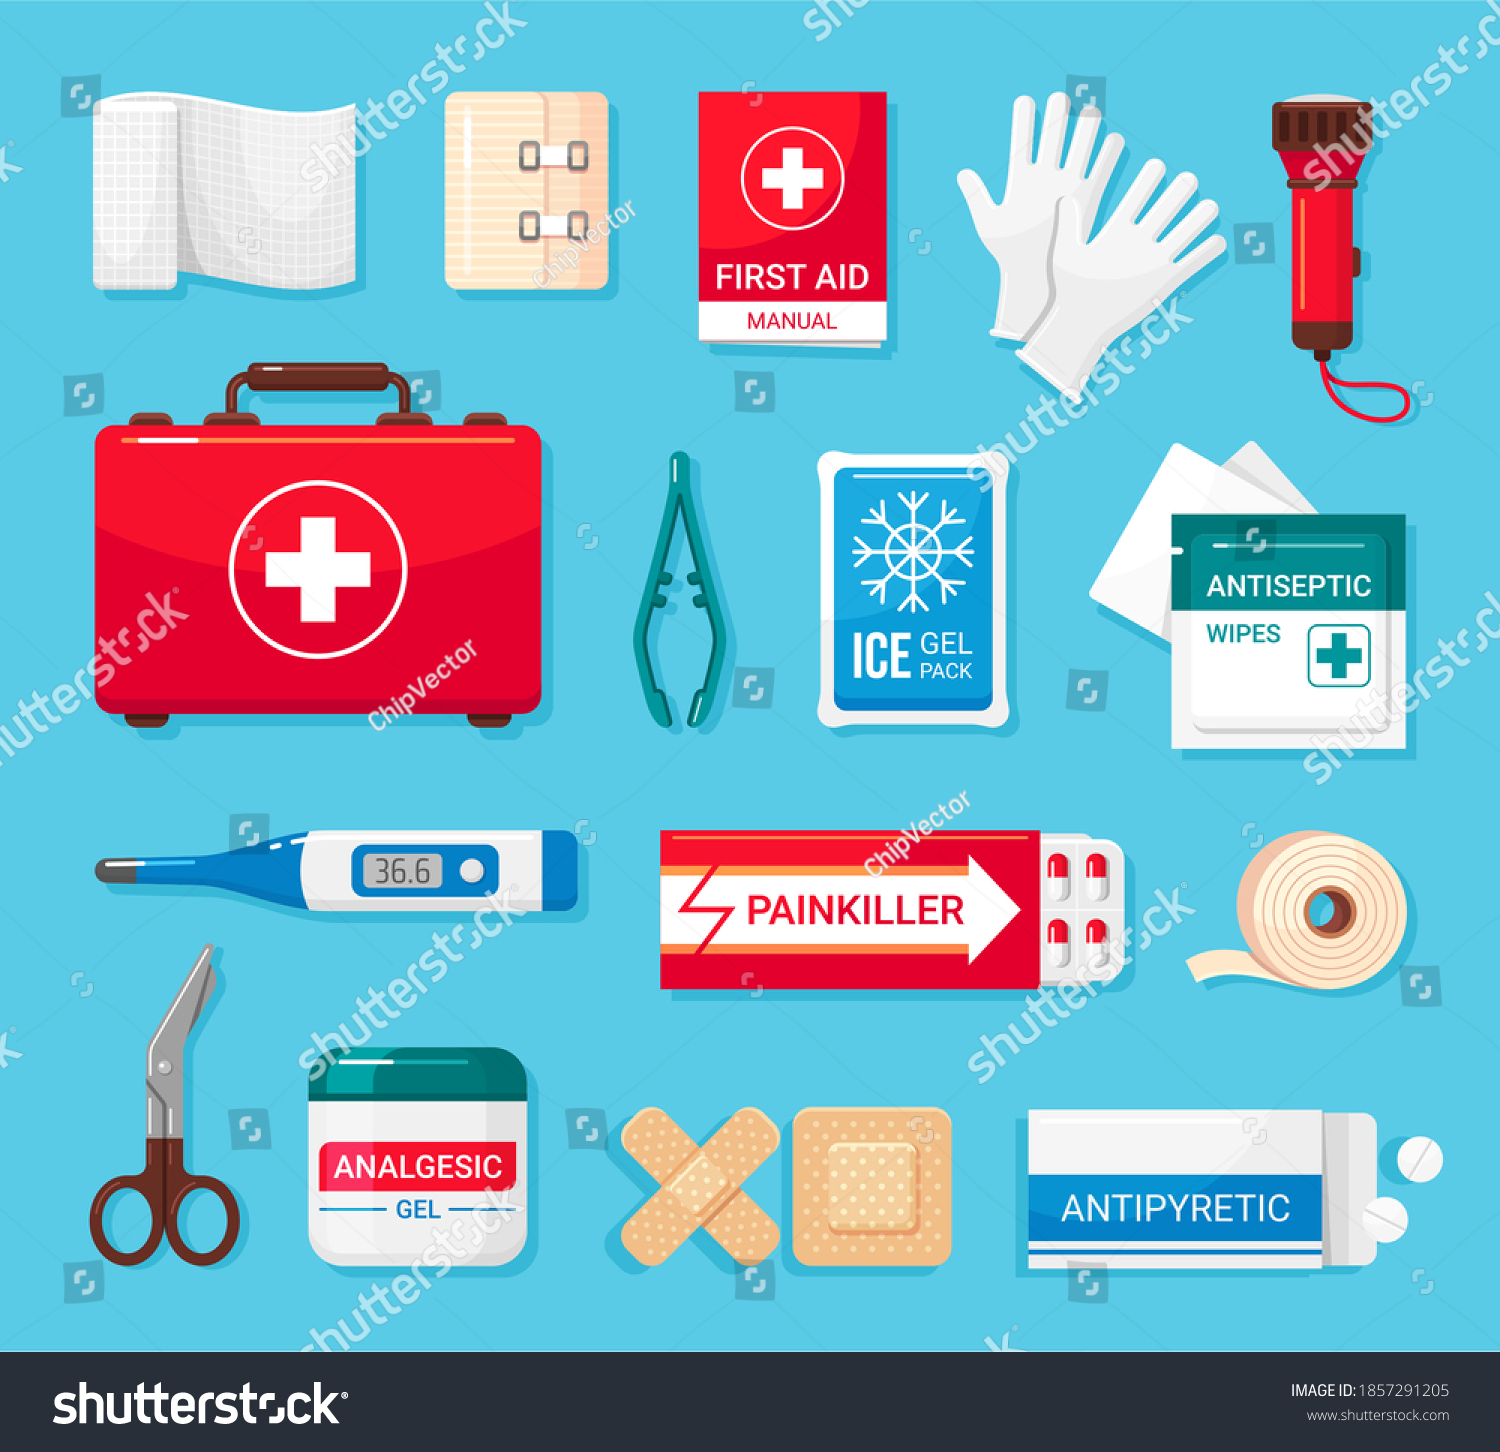 First aid kit flat icons set. Bandage, adhesive plaster, painkiller, antipyretic pills, clinic thermometer, ice gel pack. Vector medical supplies cartoon collection illustration isolated on blue. #1857291205